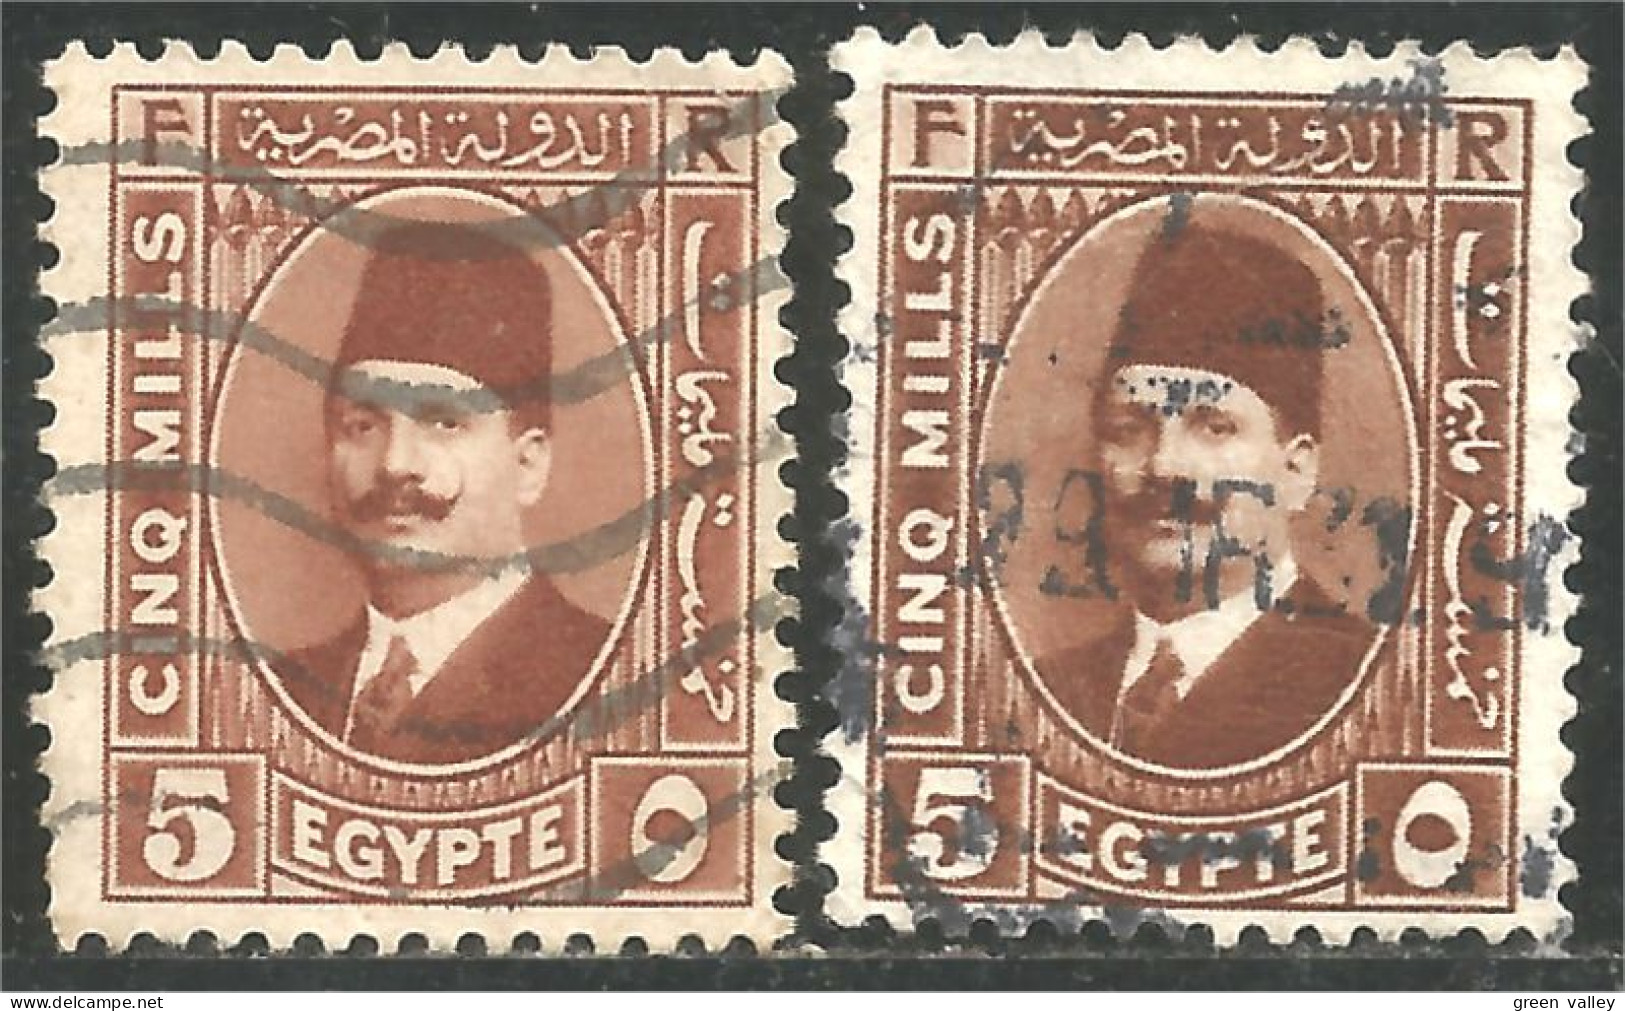 316 Egypte Roi King Fuad 2 Colors (EGY-184) - Used Stamps